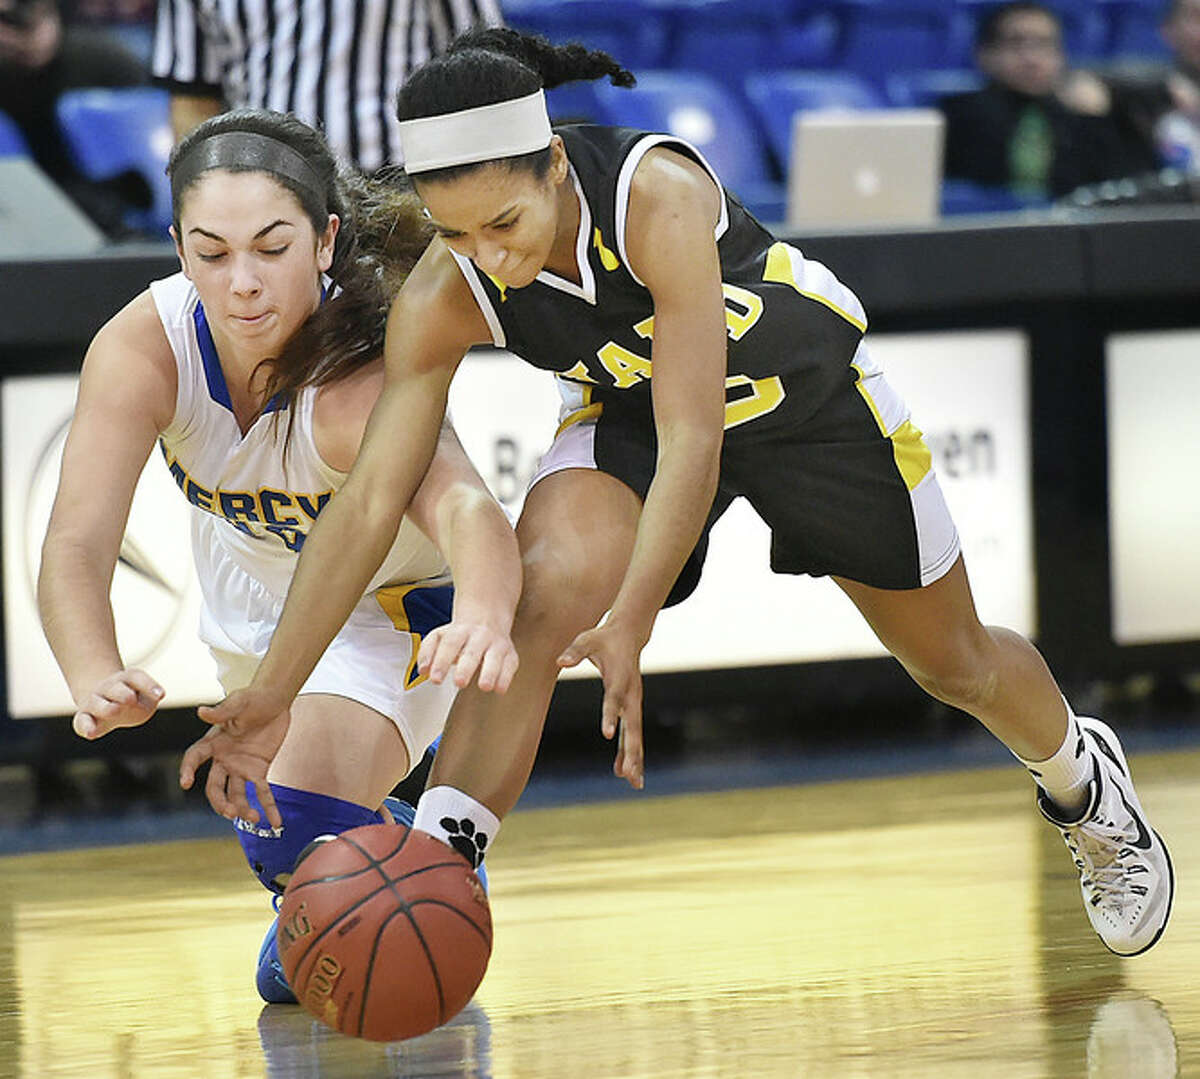 Mercy’s Samantha Gallo battles Hand’s Gabby Martin in the SCC Girls Basketball Championship game, Wednesday, February 25, 2015, at the TD Sports Center at Quinnipiac University in Hamden, Conn. The Mercy Tigers defeated the Hand Tigers, 57-52. (Photographs by Catherine Avalone/New Haven Register)